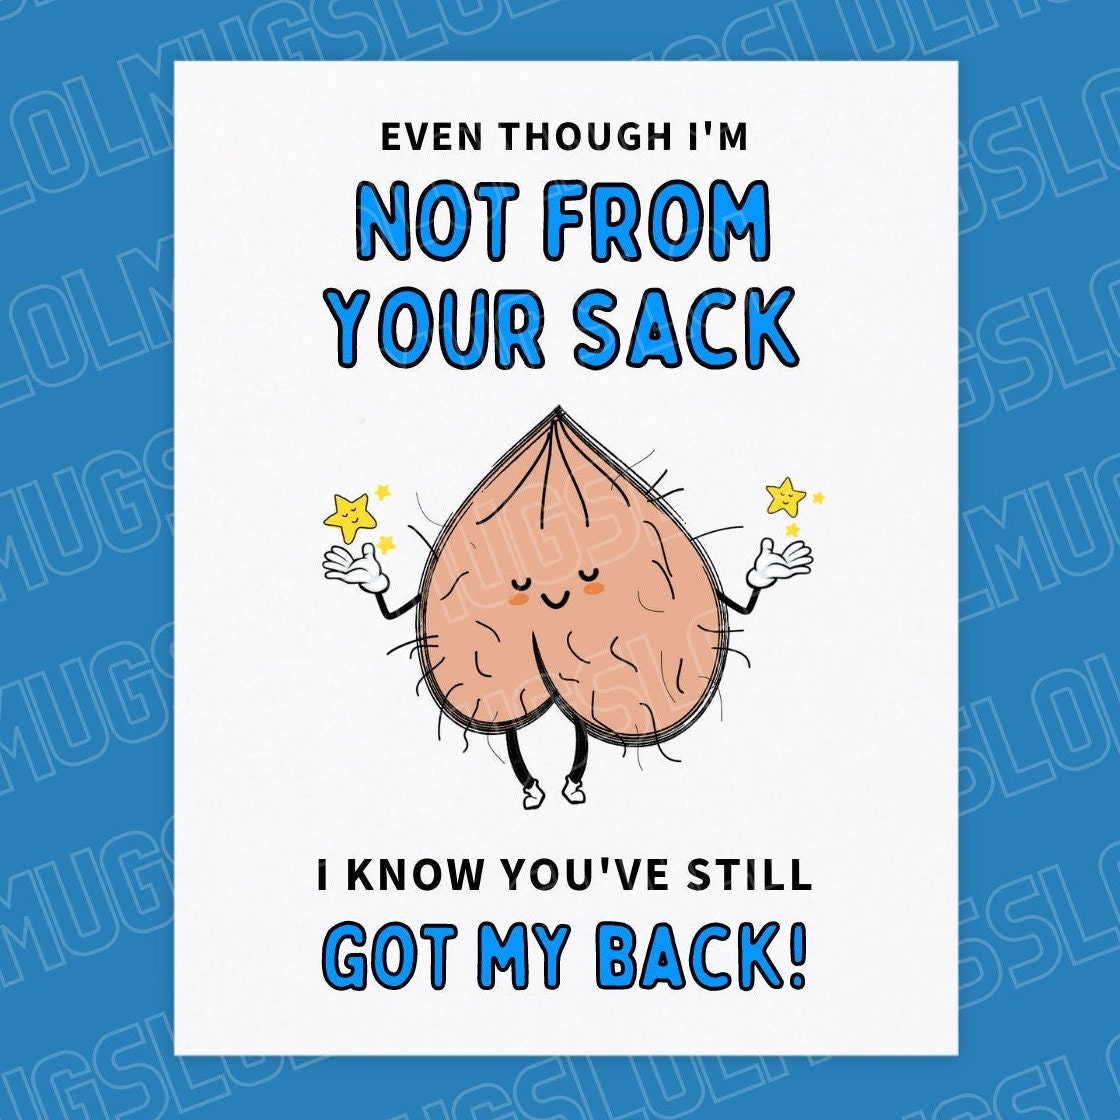 Step Dad Birthday Card, Not From Your Sack, Still got my back card, Step dad, father card, step dad funny cards, rude funny humour cheeky